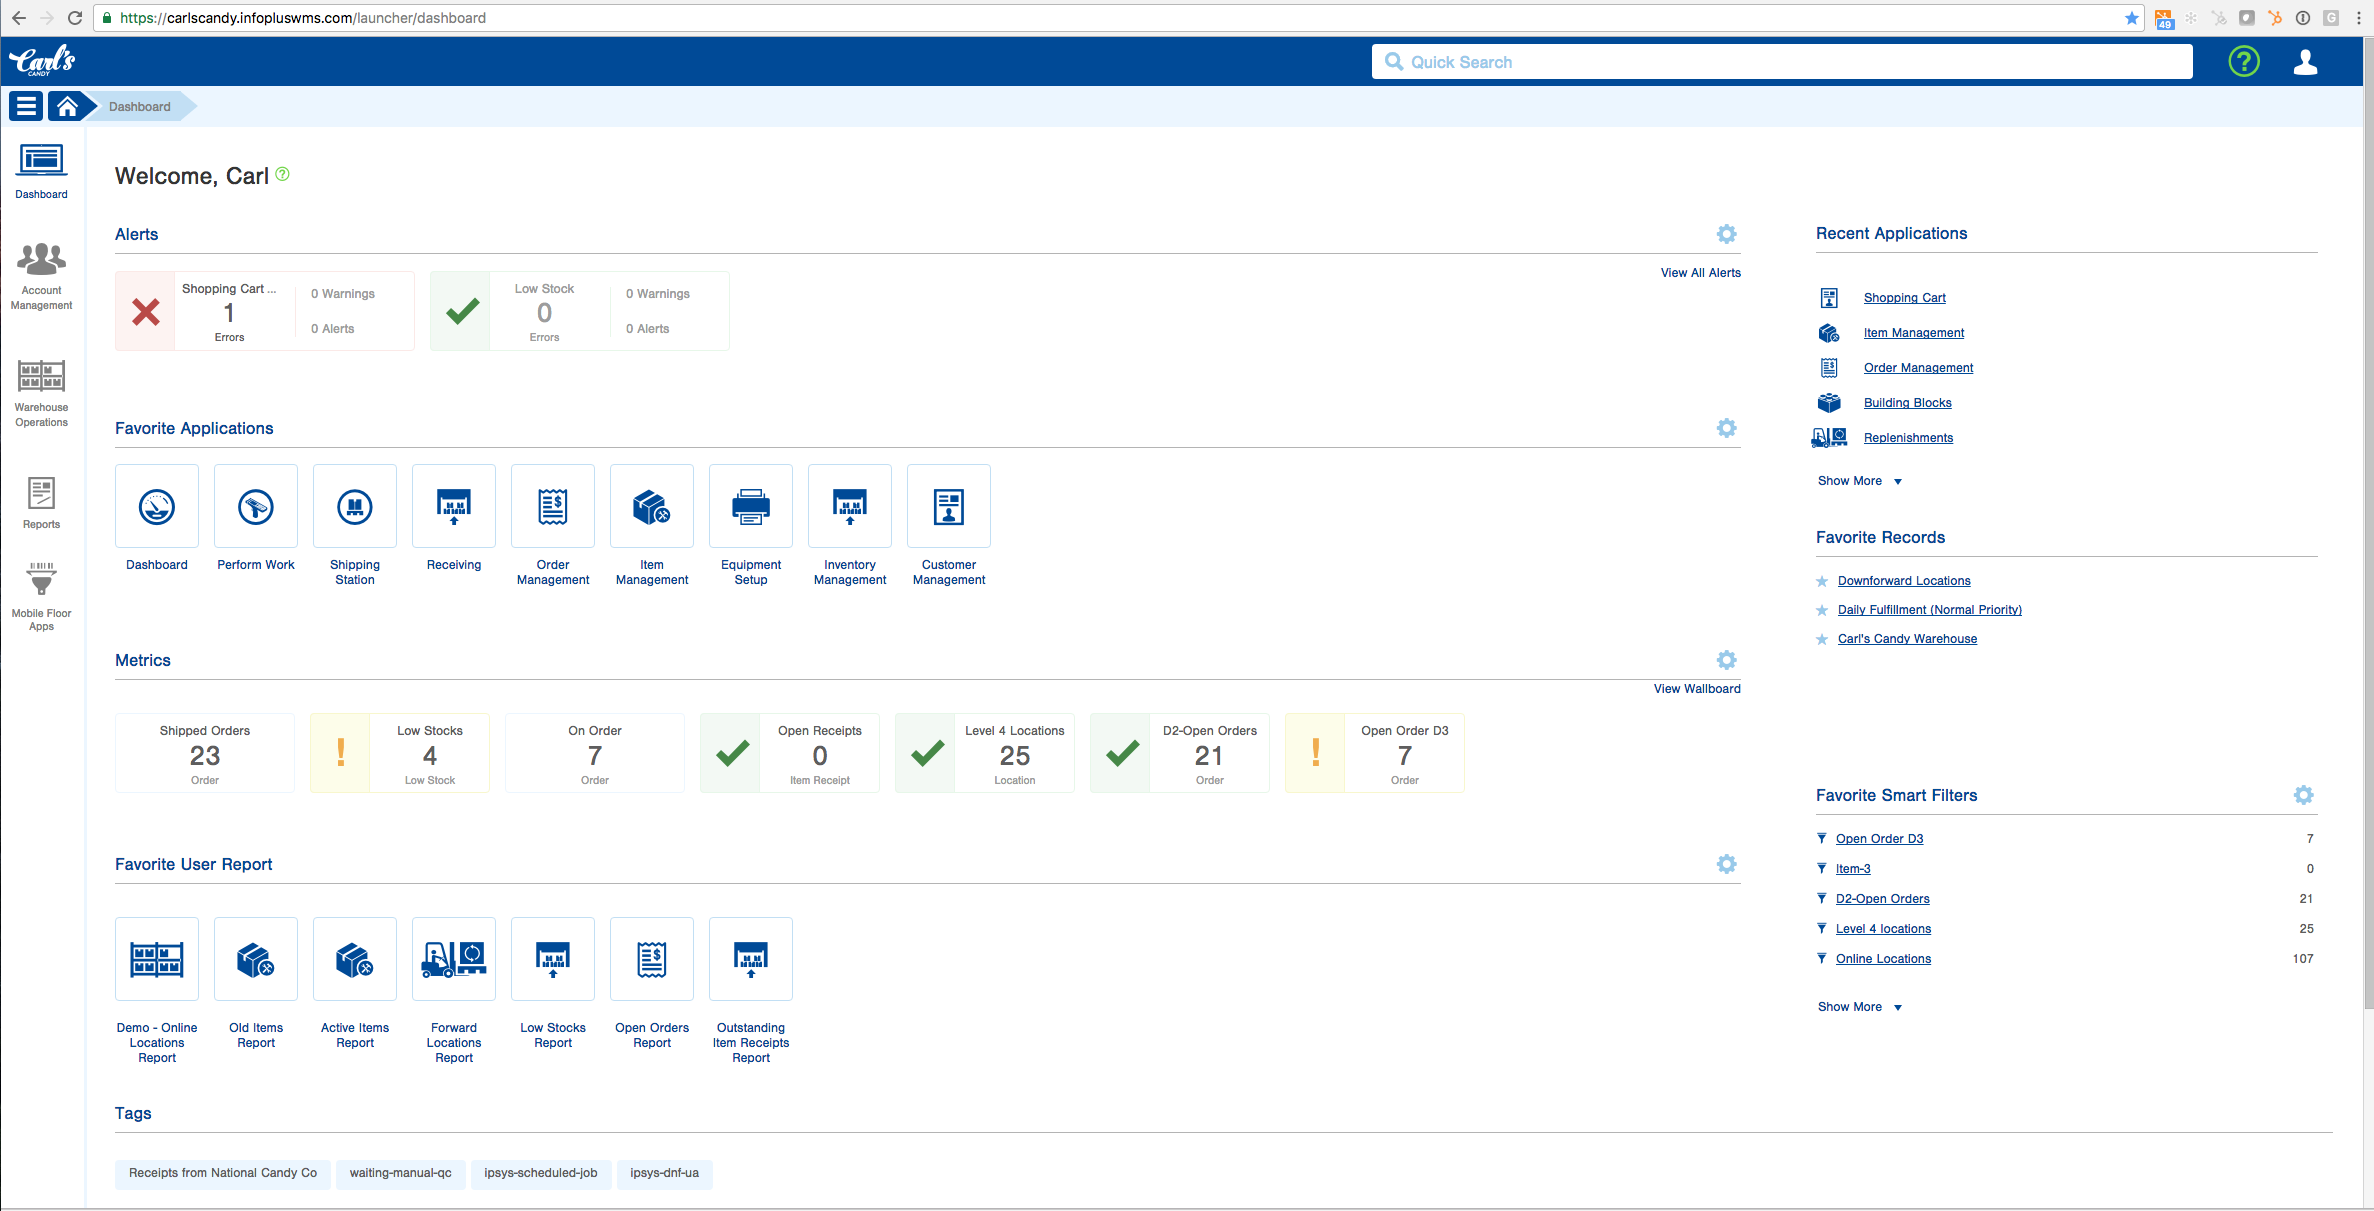 View of a user's dashboard. These are customizable per user based on the data they need to see at a glance throughout their day/week.